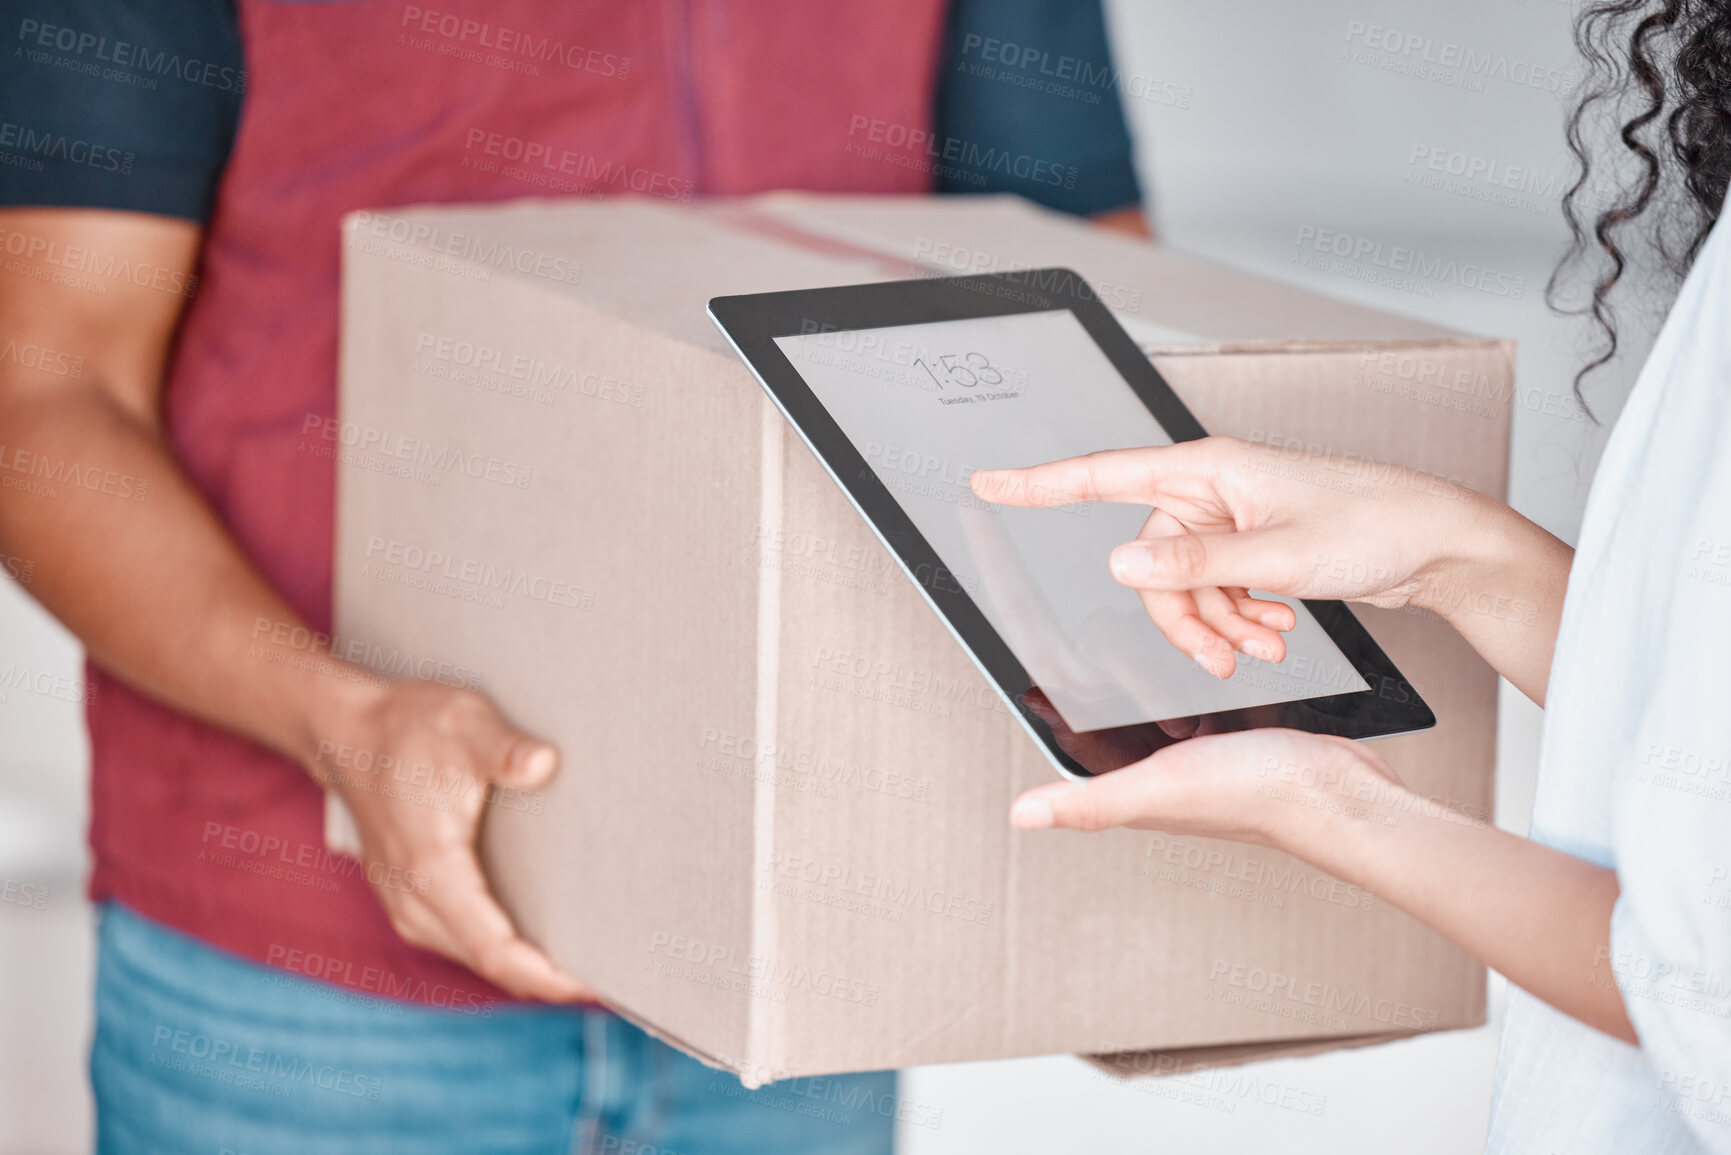 Buy stock photo Delivery, box and woman with a green screen tablet app for advertising, product and digital marketing space. Ecommerce, shipping and courier with a package for a person typing on a device with mockup